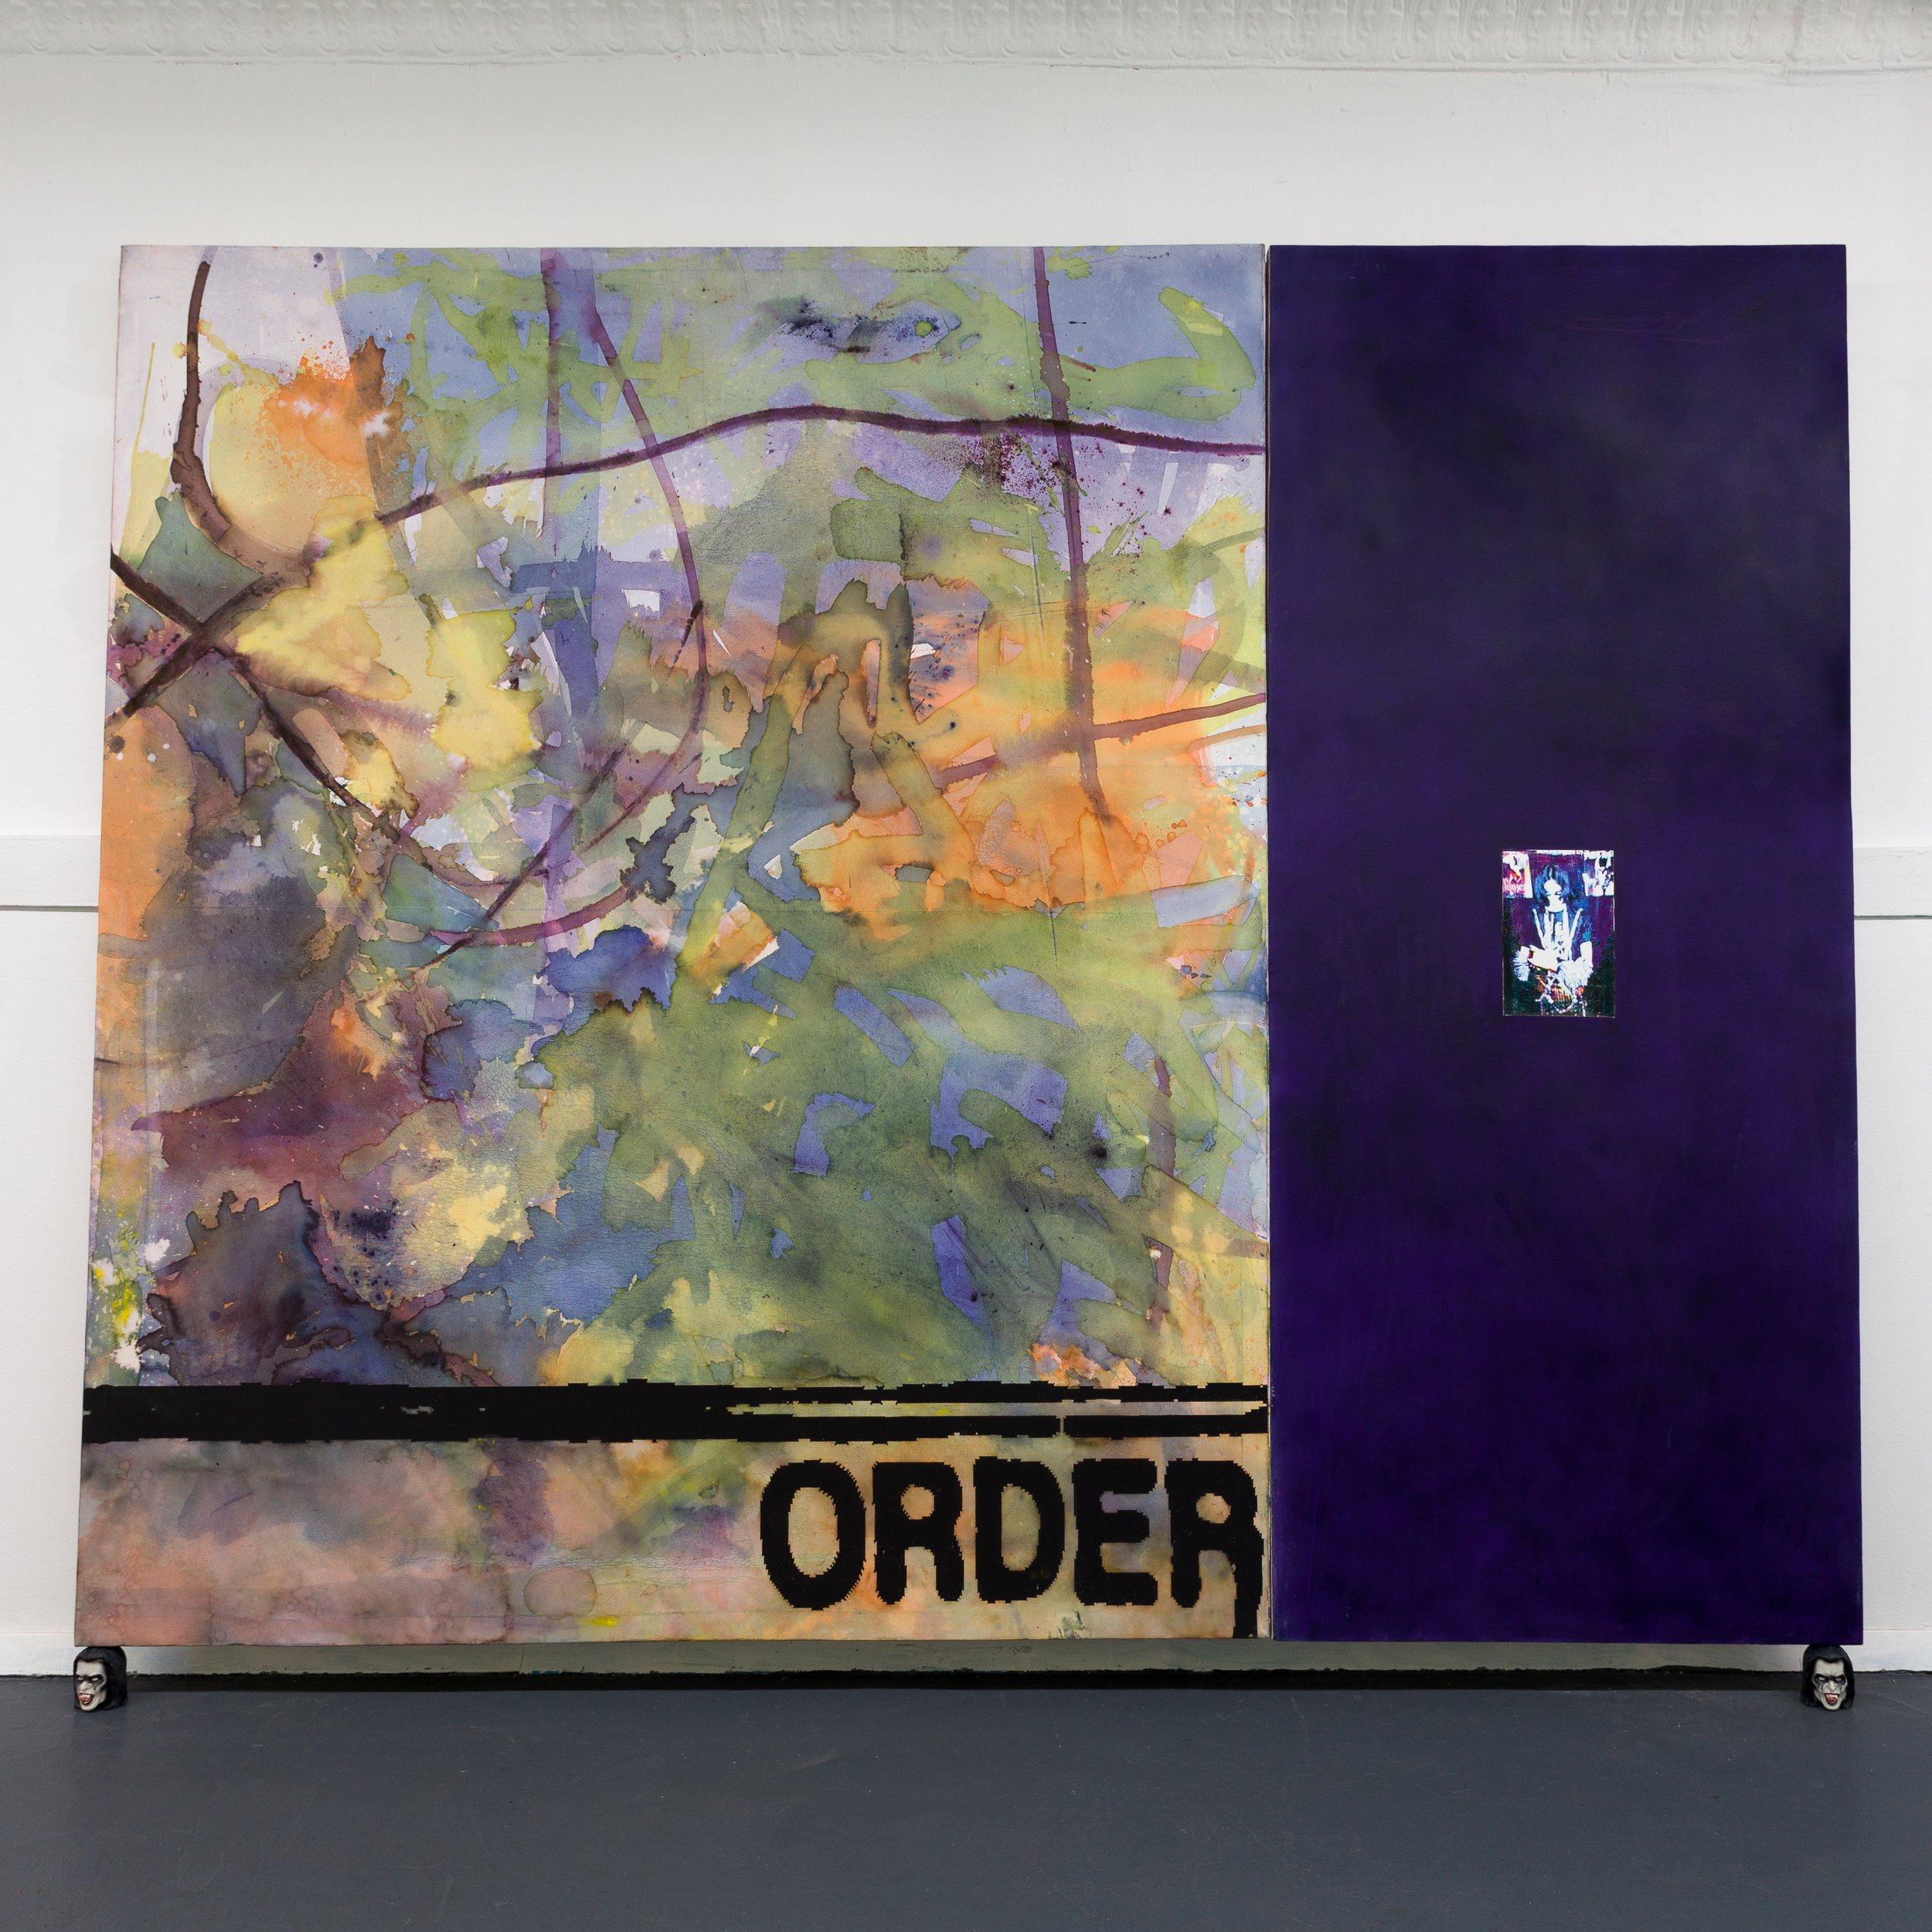   AJ Kahn,   Order_5_Angel , 2022, Ink, charcoal, and acrylic on canvas, 72 x 90 in, 182.9 x 228.6 cm 